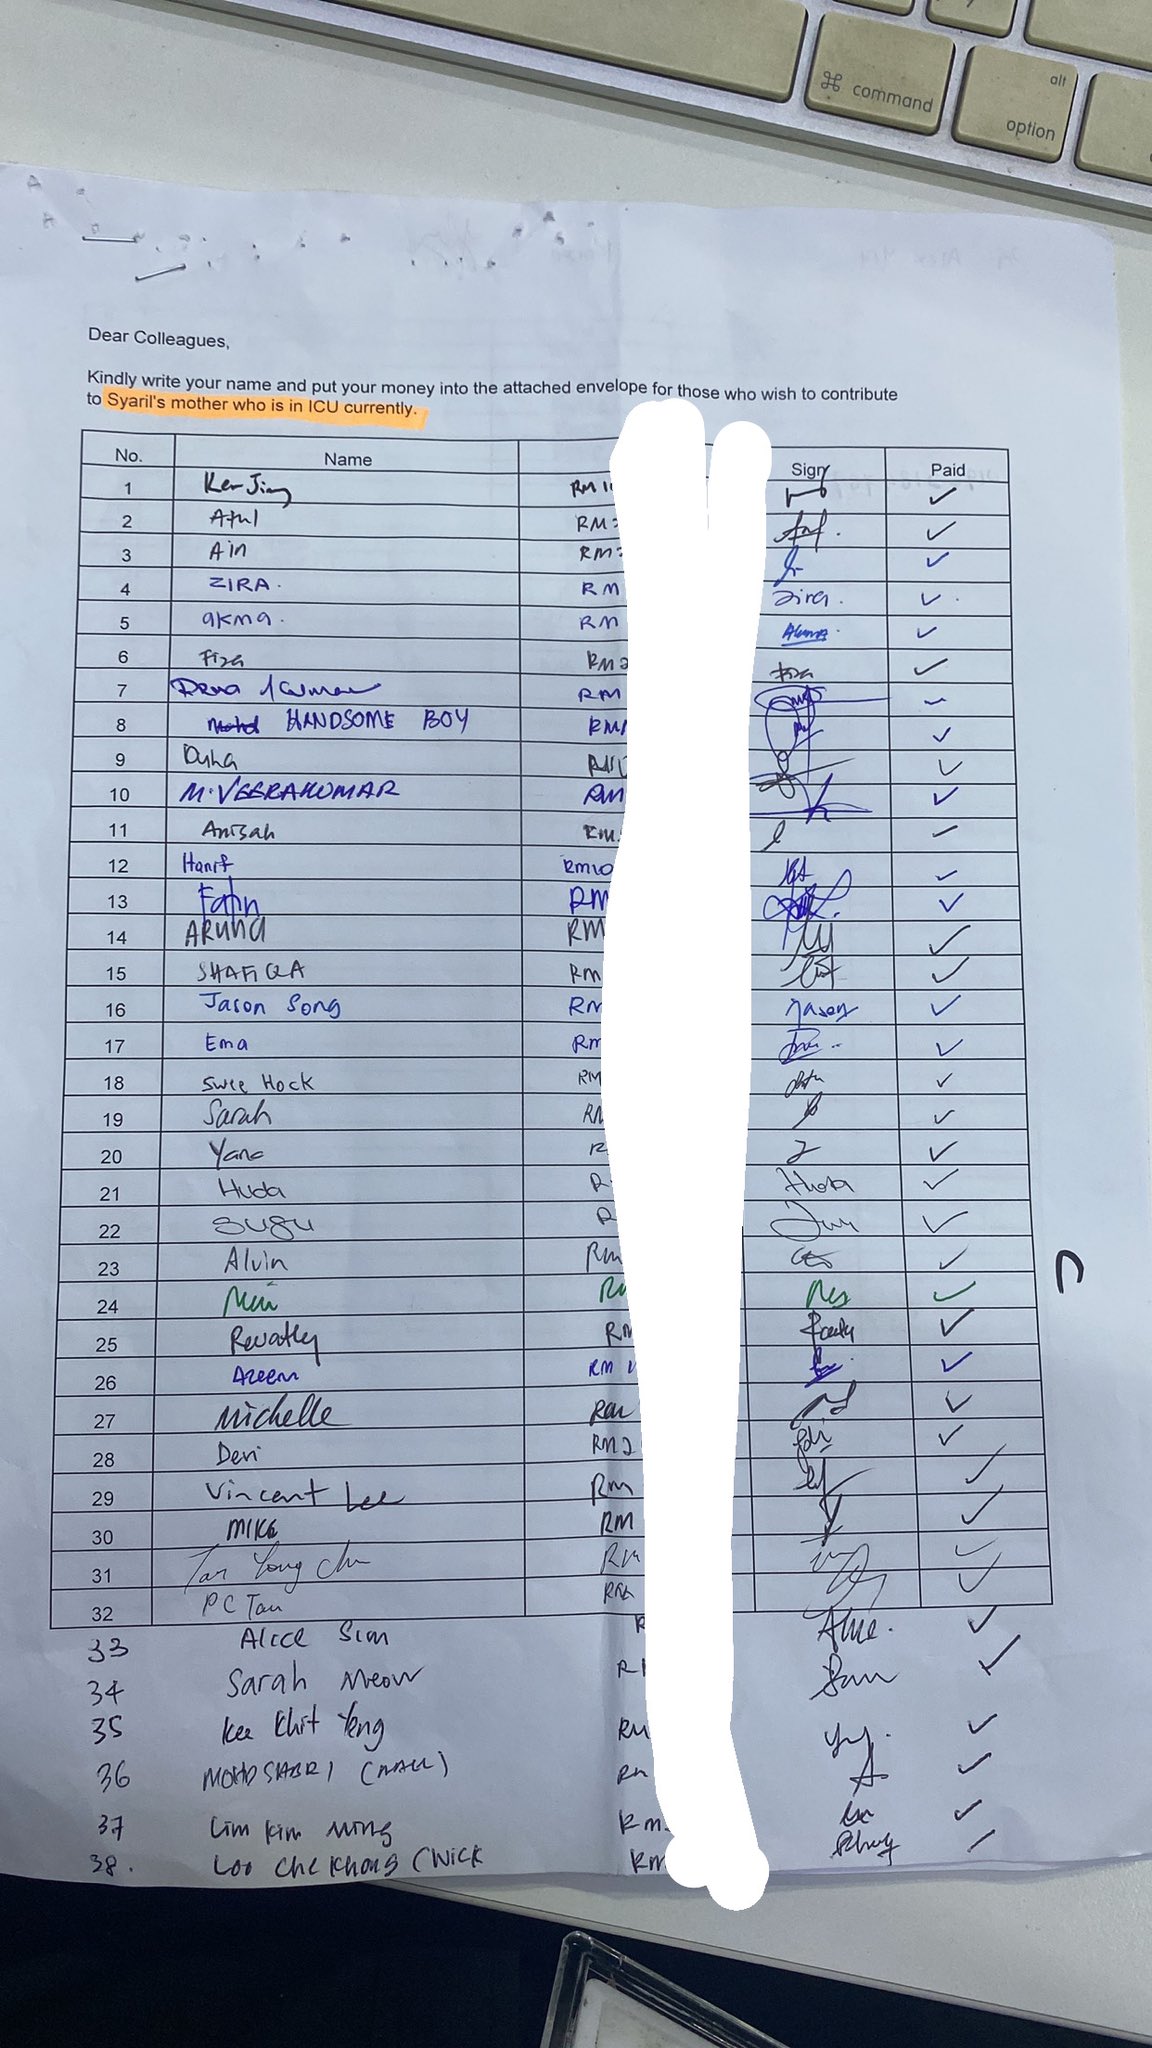 A list of names of Syahril's colleagues who chipped in to help with some of his mother's medical bills. Image credit: @AkuSyahrel